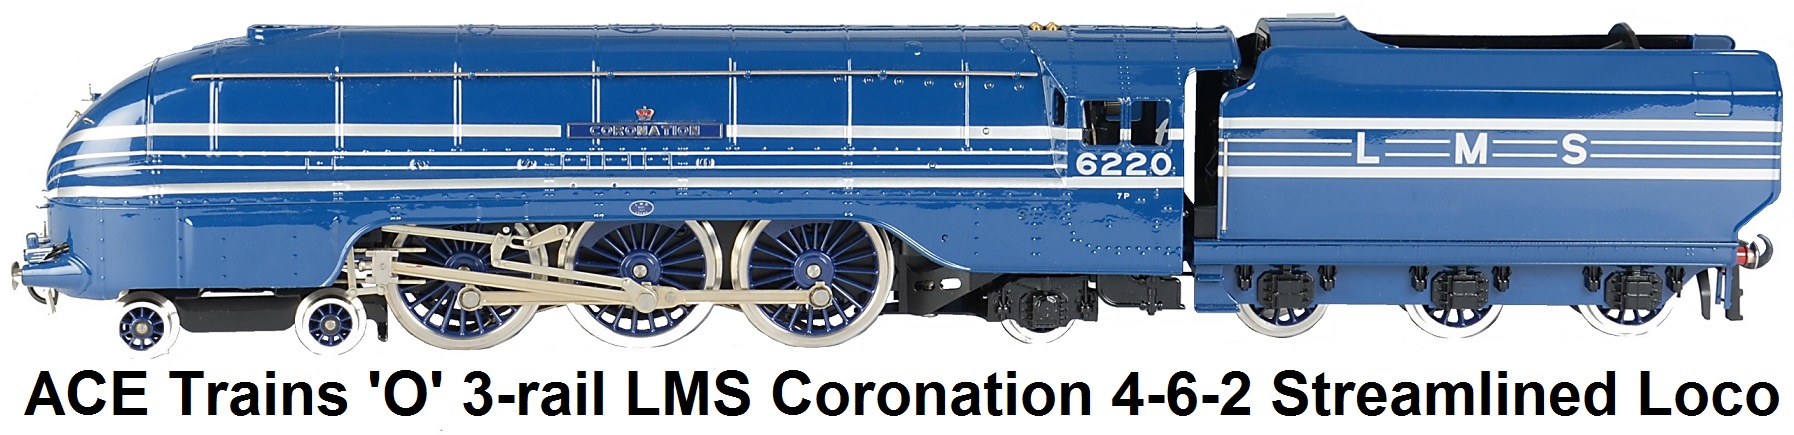 ACE Trains 'O' gauge 3-rail LMS ‘Coronation’ 4-6-2 Locomotive and Tender, in streamlined blue livery